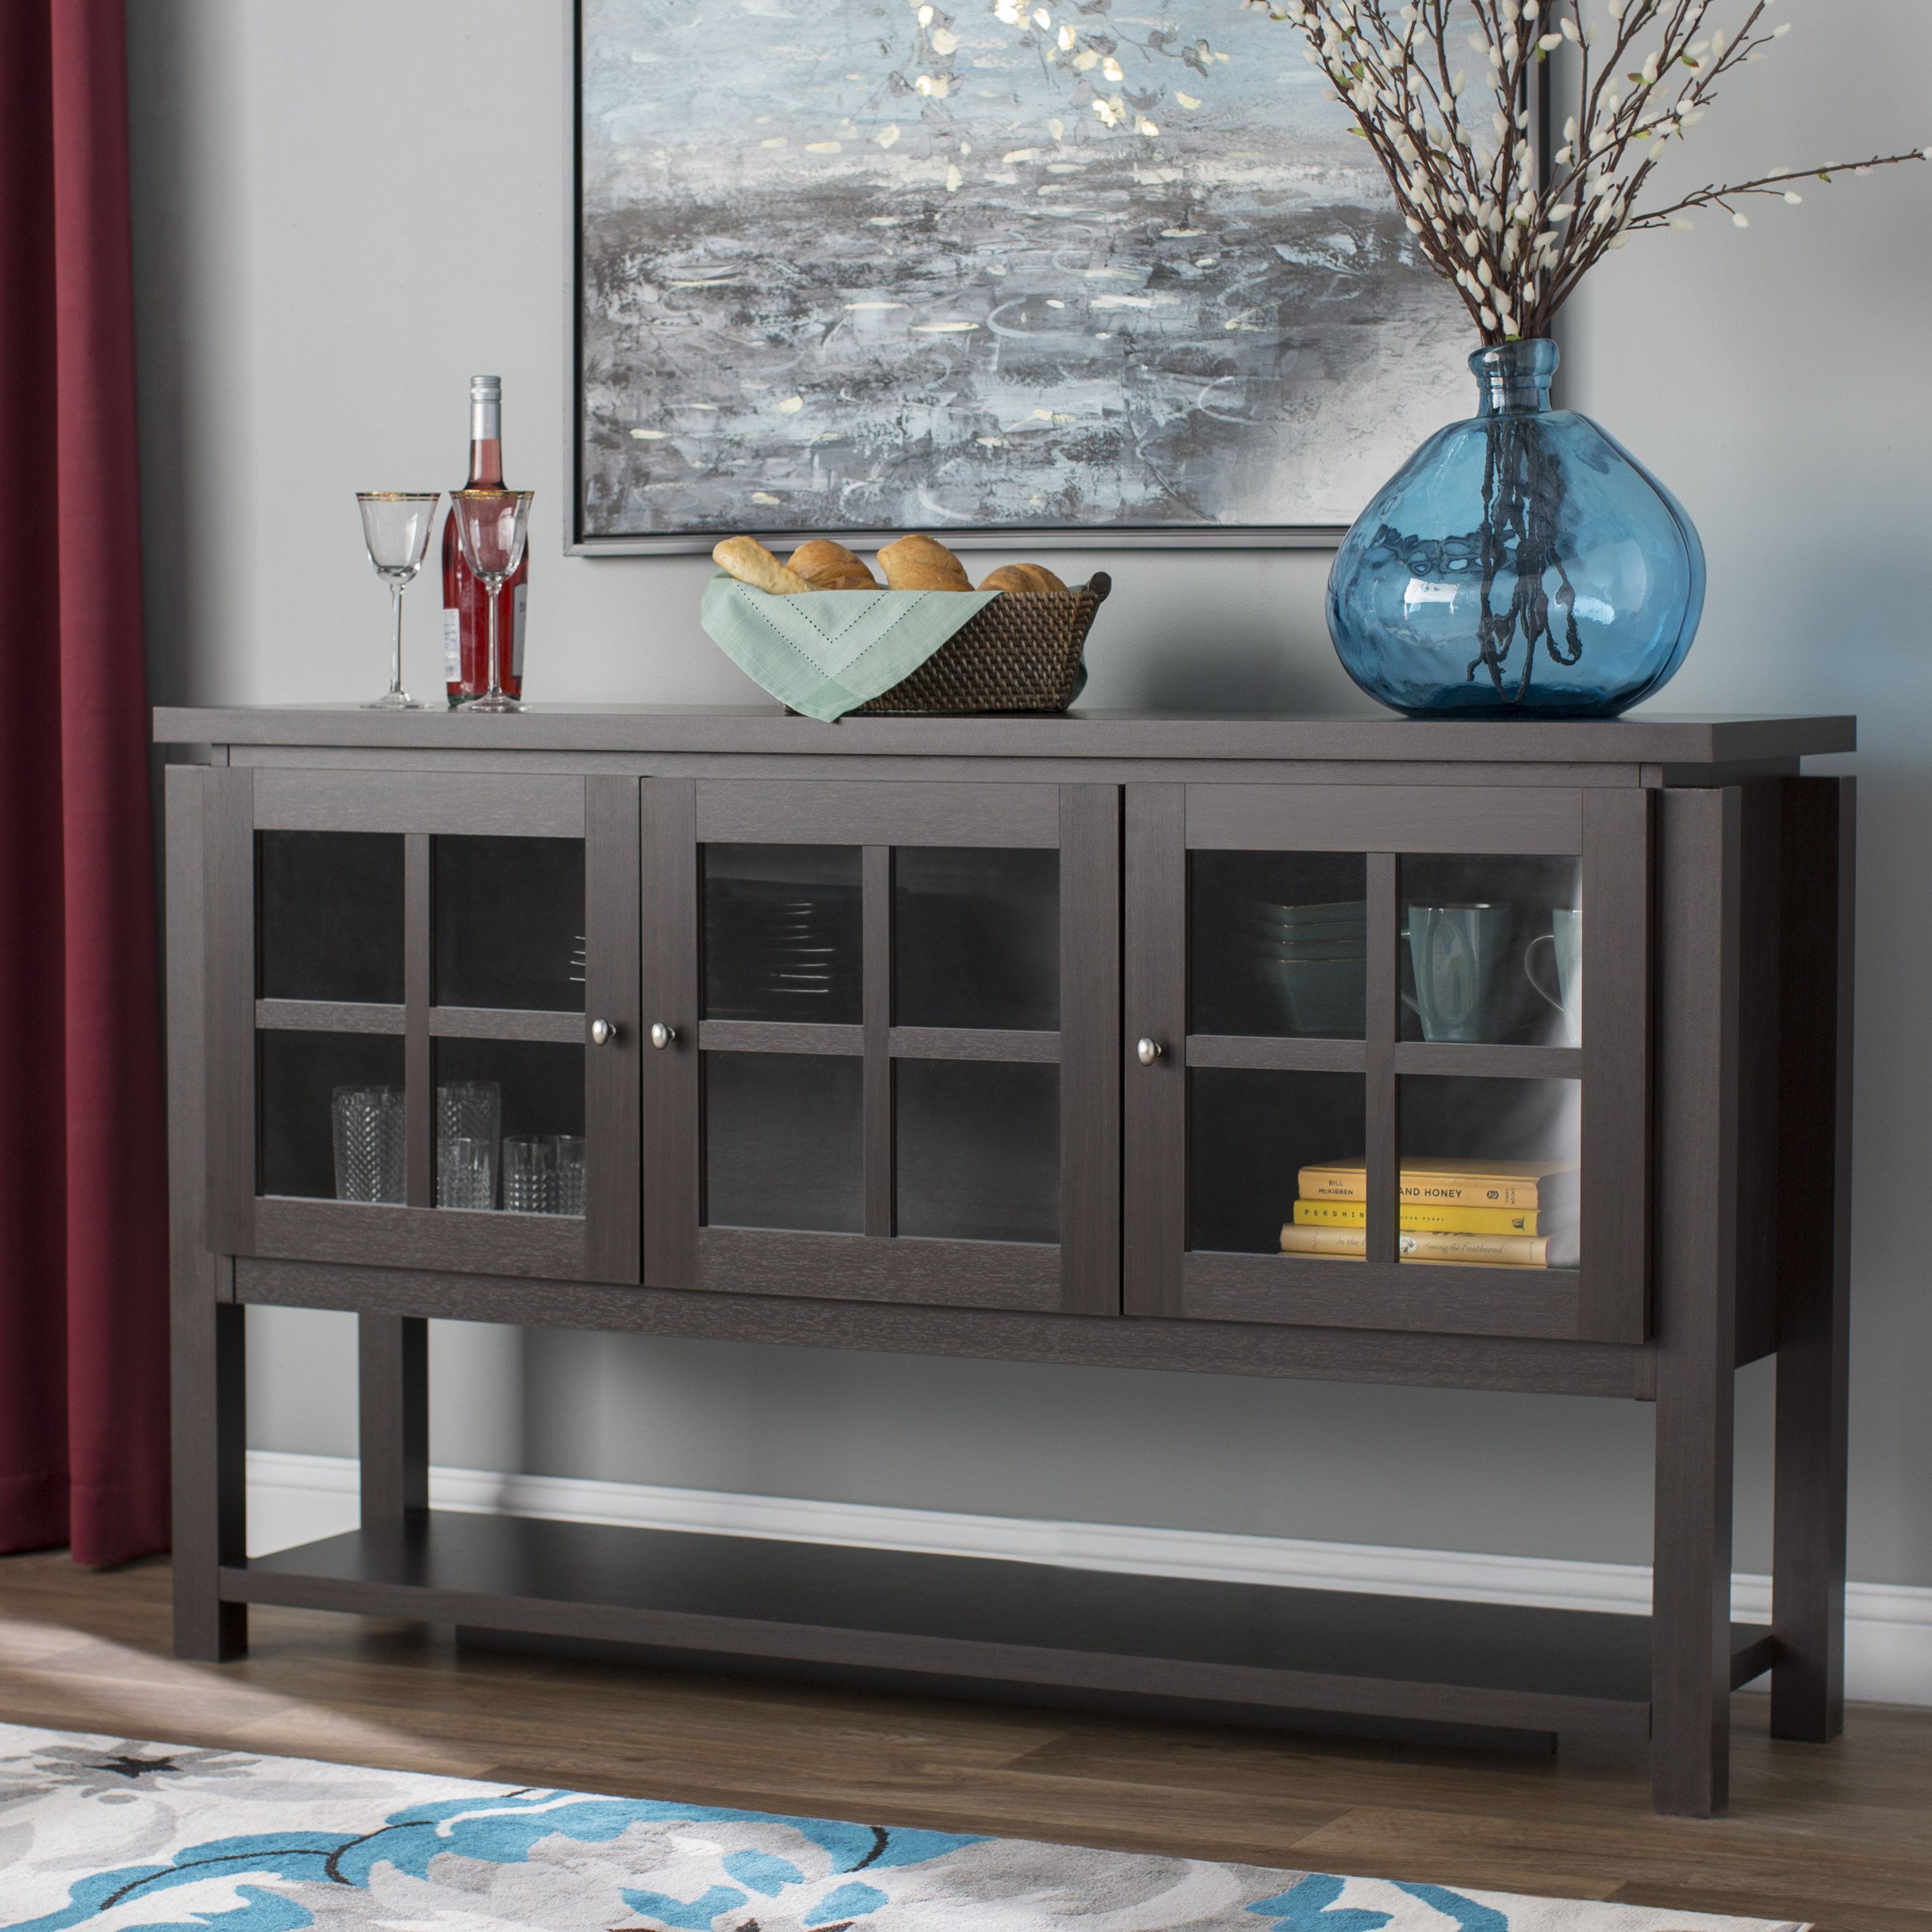 Laurel Foundry Modern Farmhouse Tyndalls Park 59'' Sideboard & Reviews |  Wayfair Intended For Recent Buffet Tables For Dining Room (View 7 of 15)